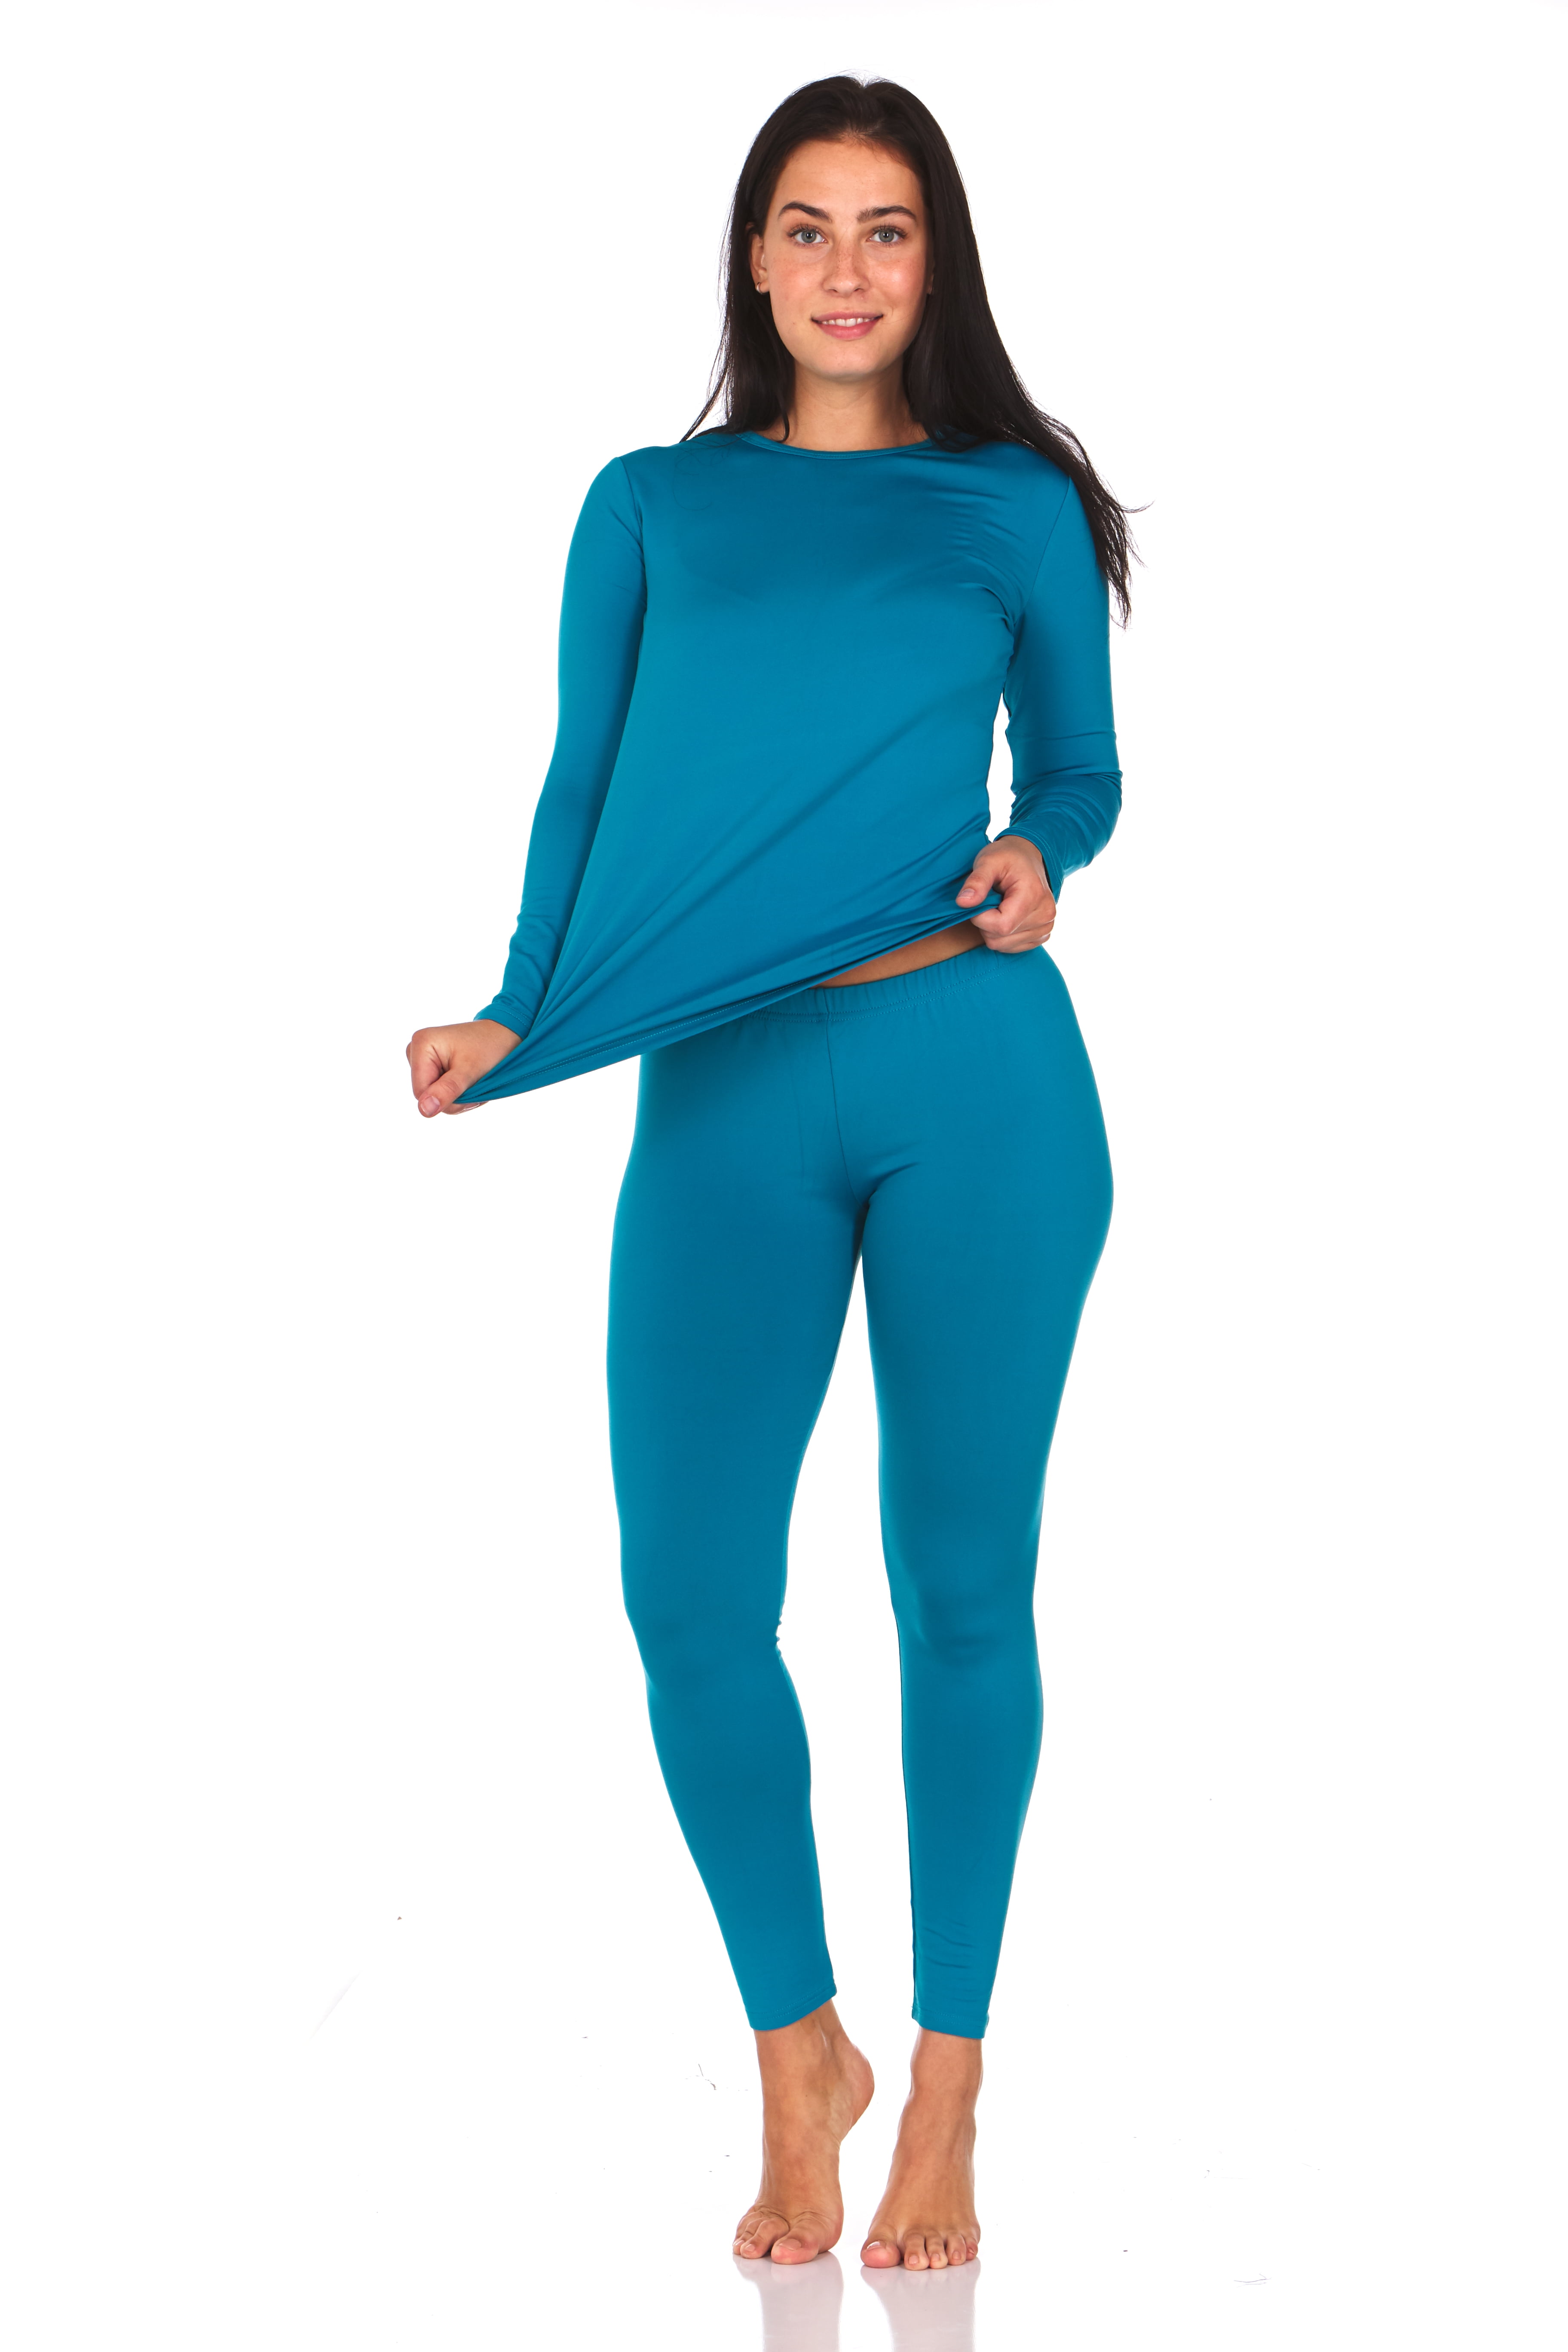 WUHOUPRO Womens Ultra Soft Thermal Underwear Long Johns with Fleece Lined